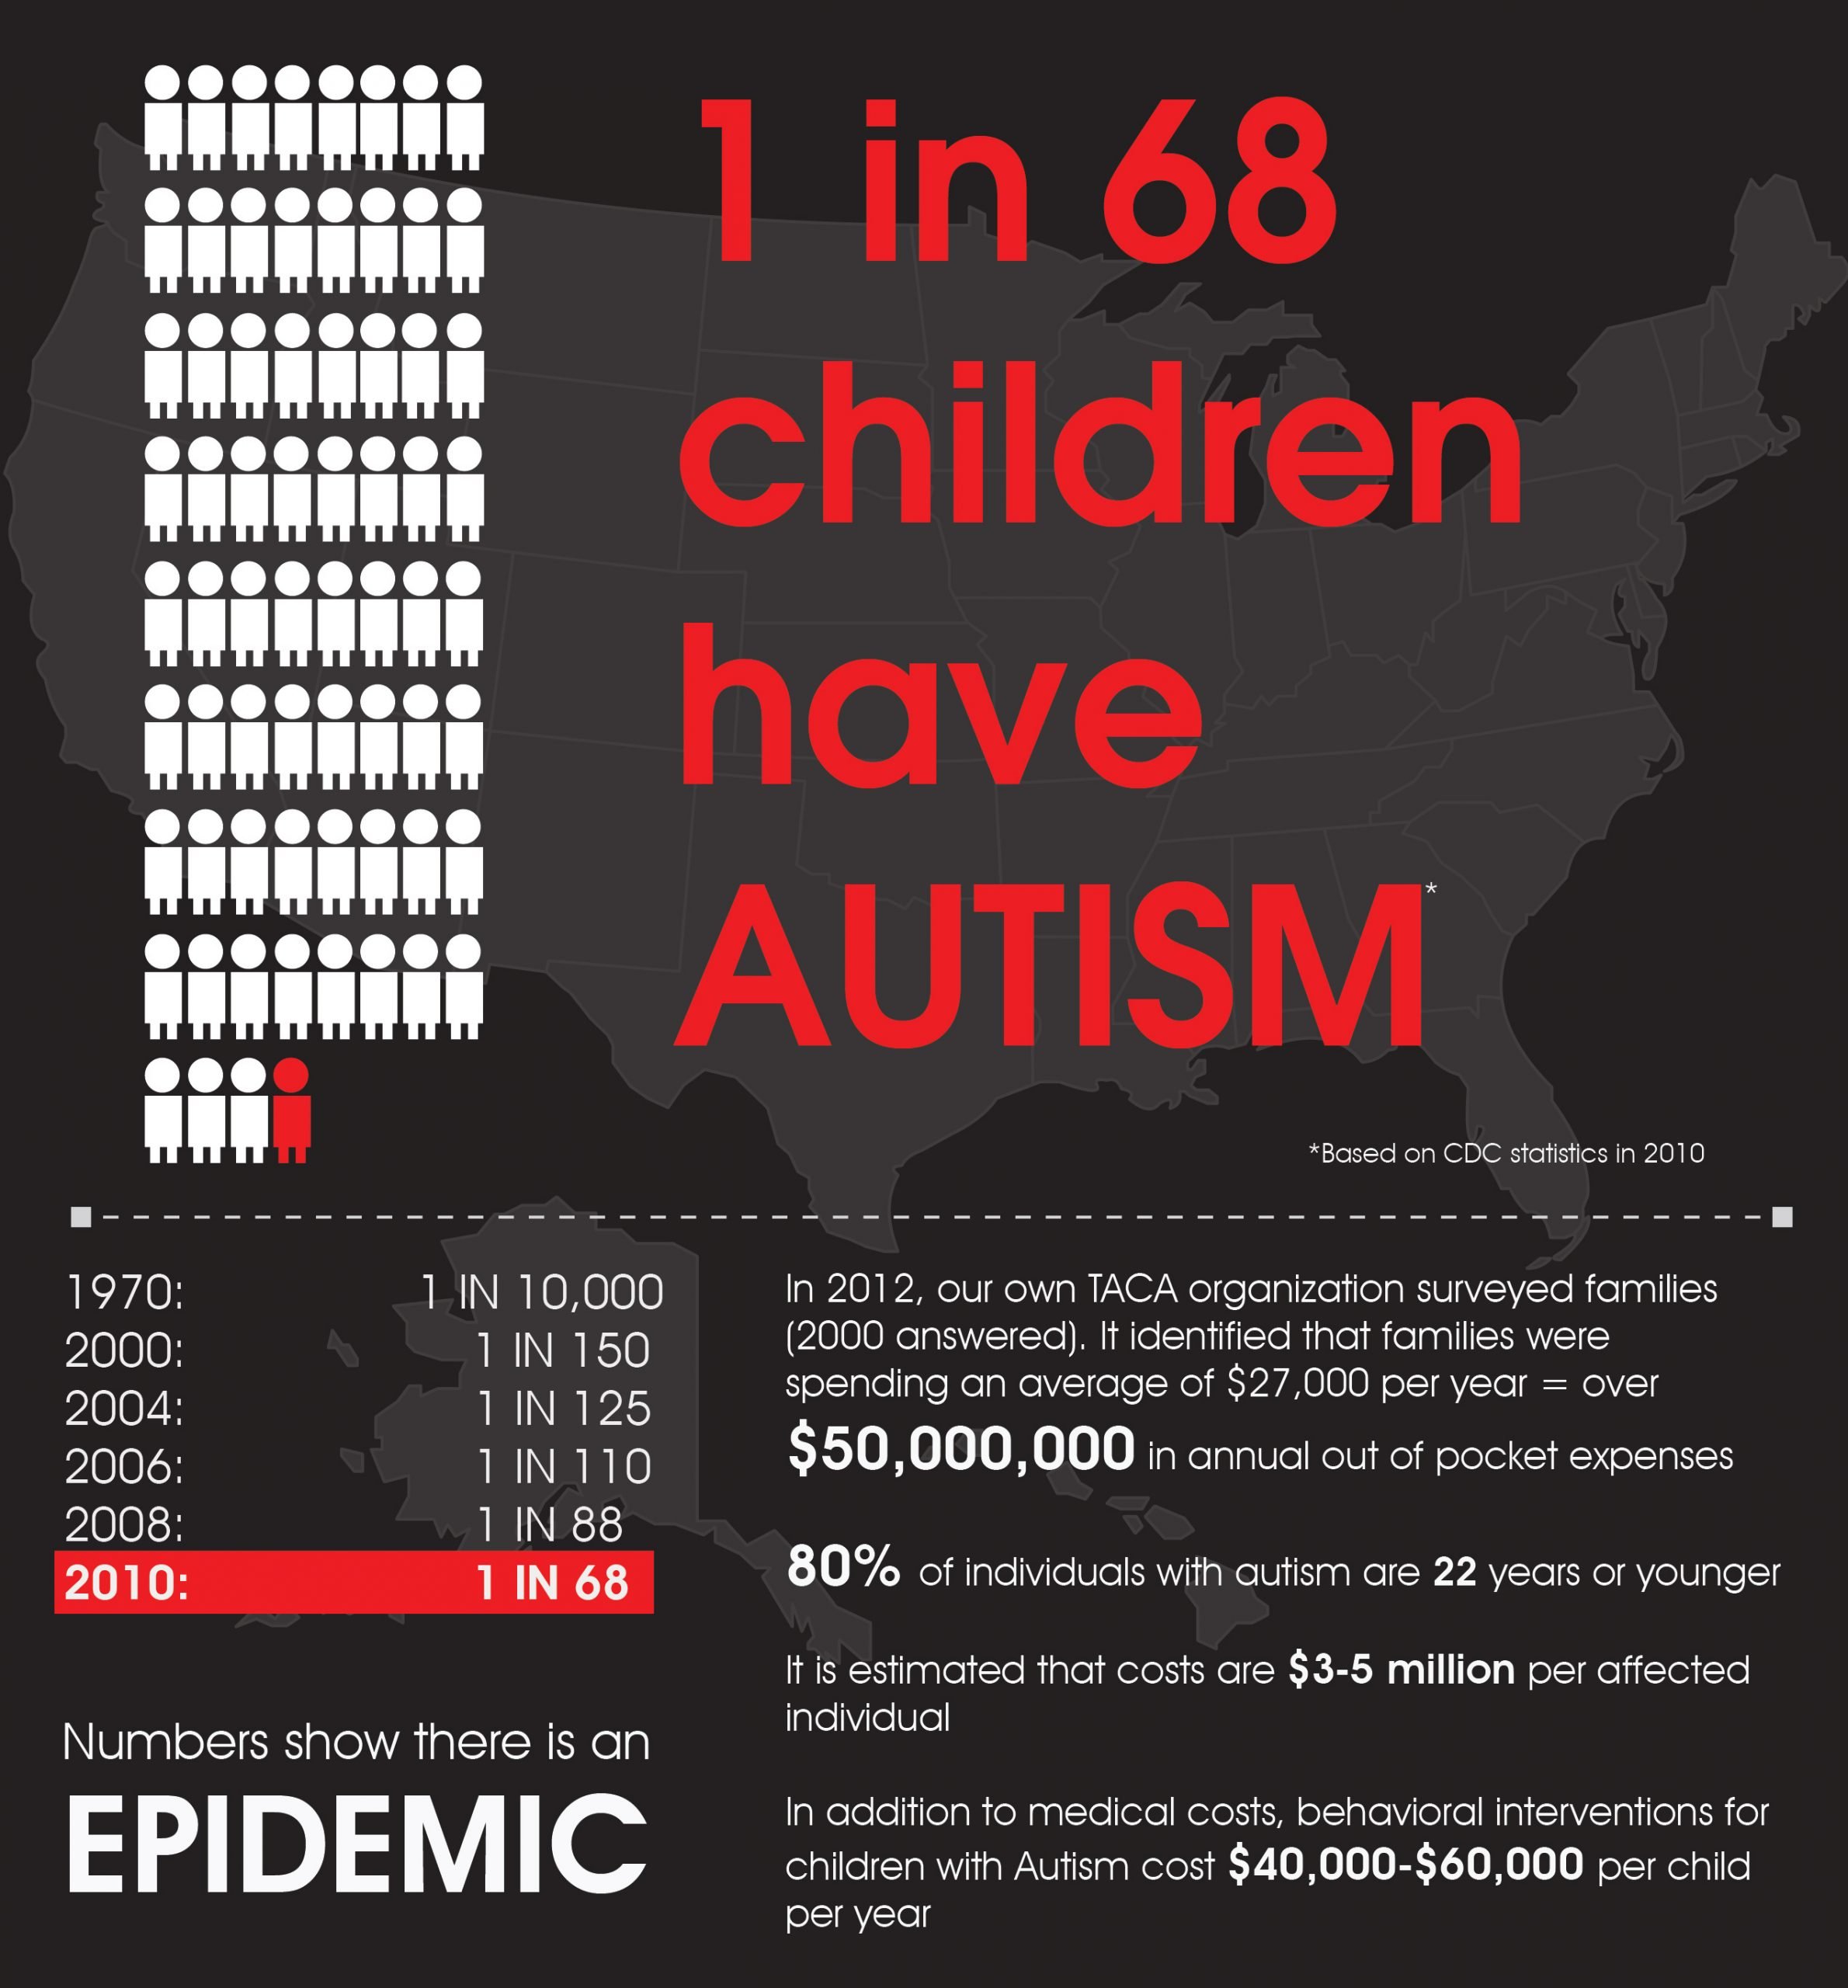 About Autism